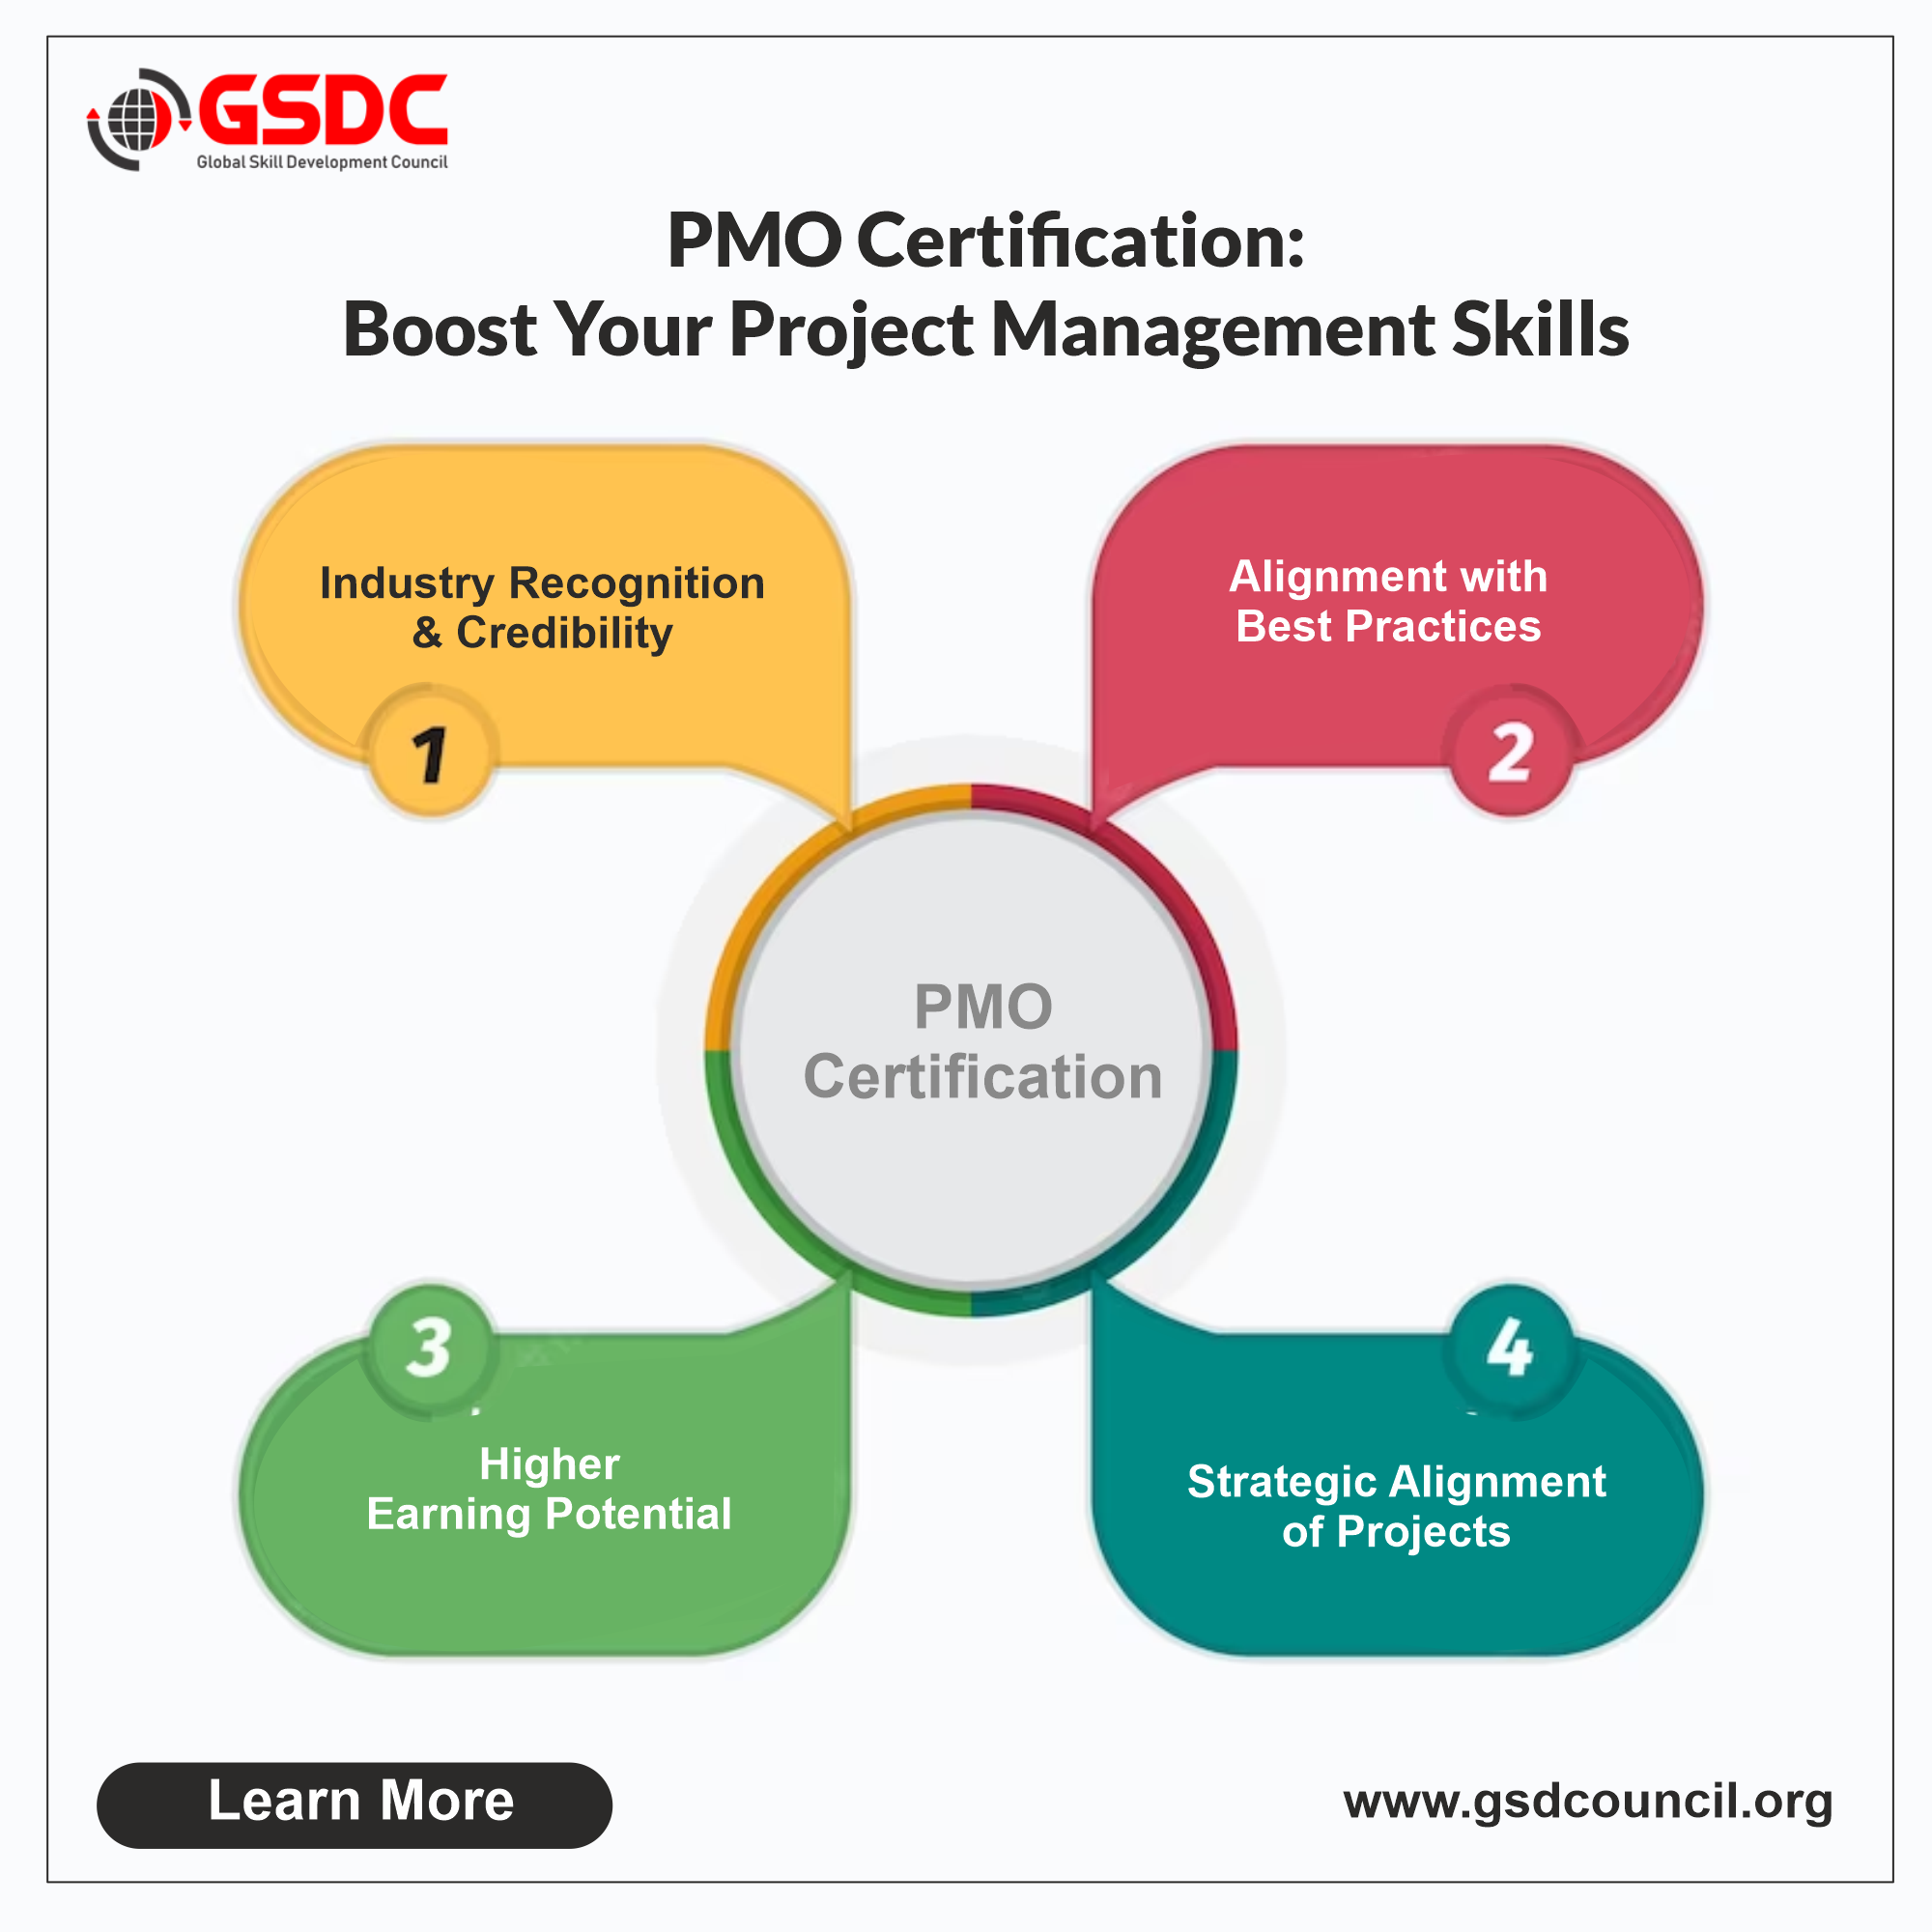 PMO Certification: Boost Your Project Management Skills